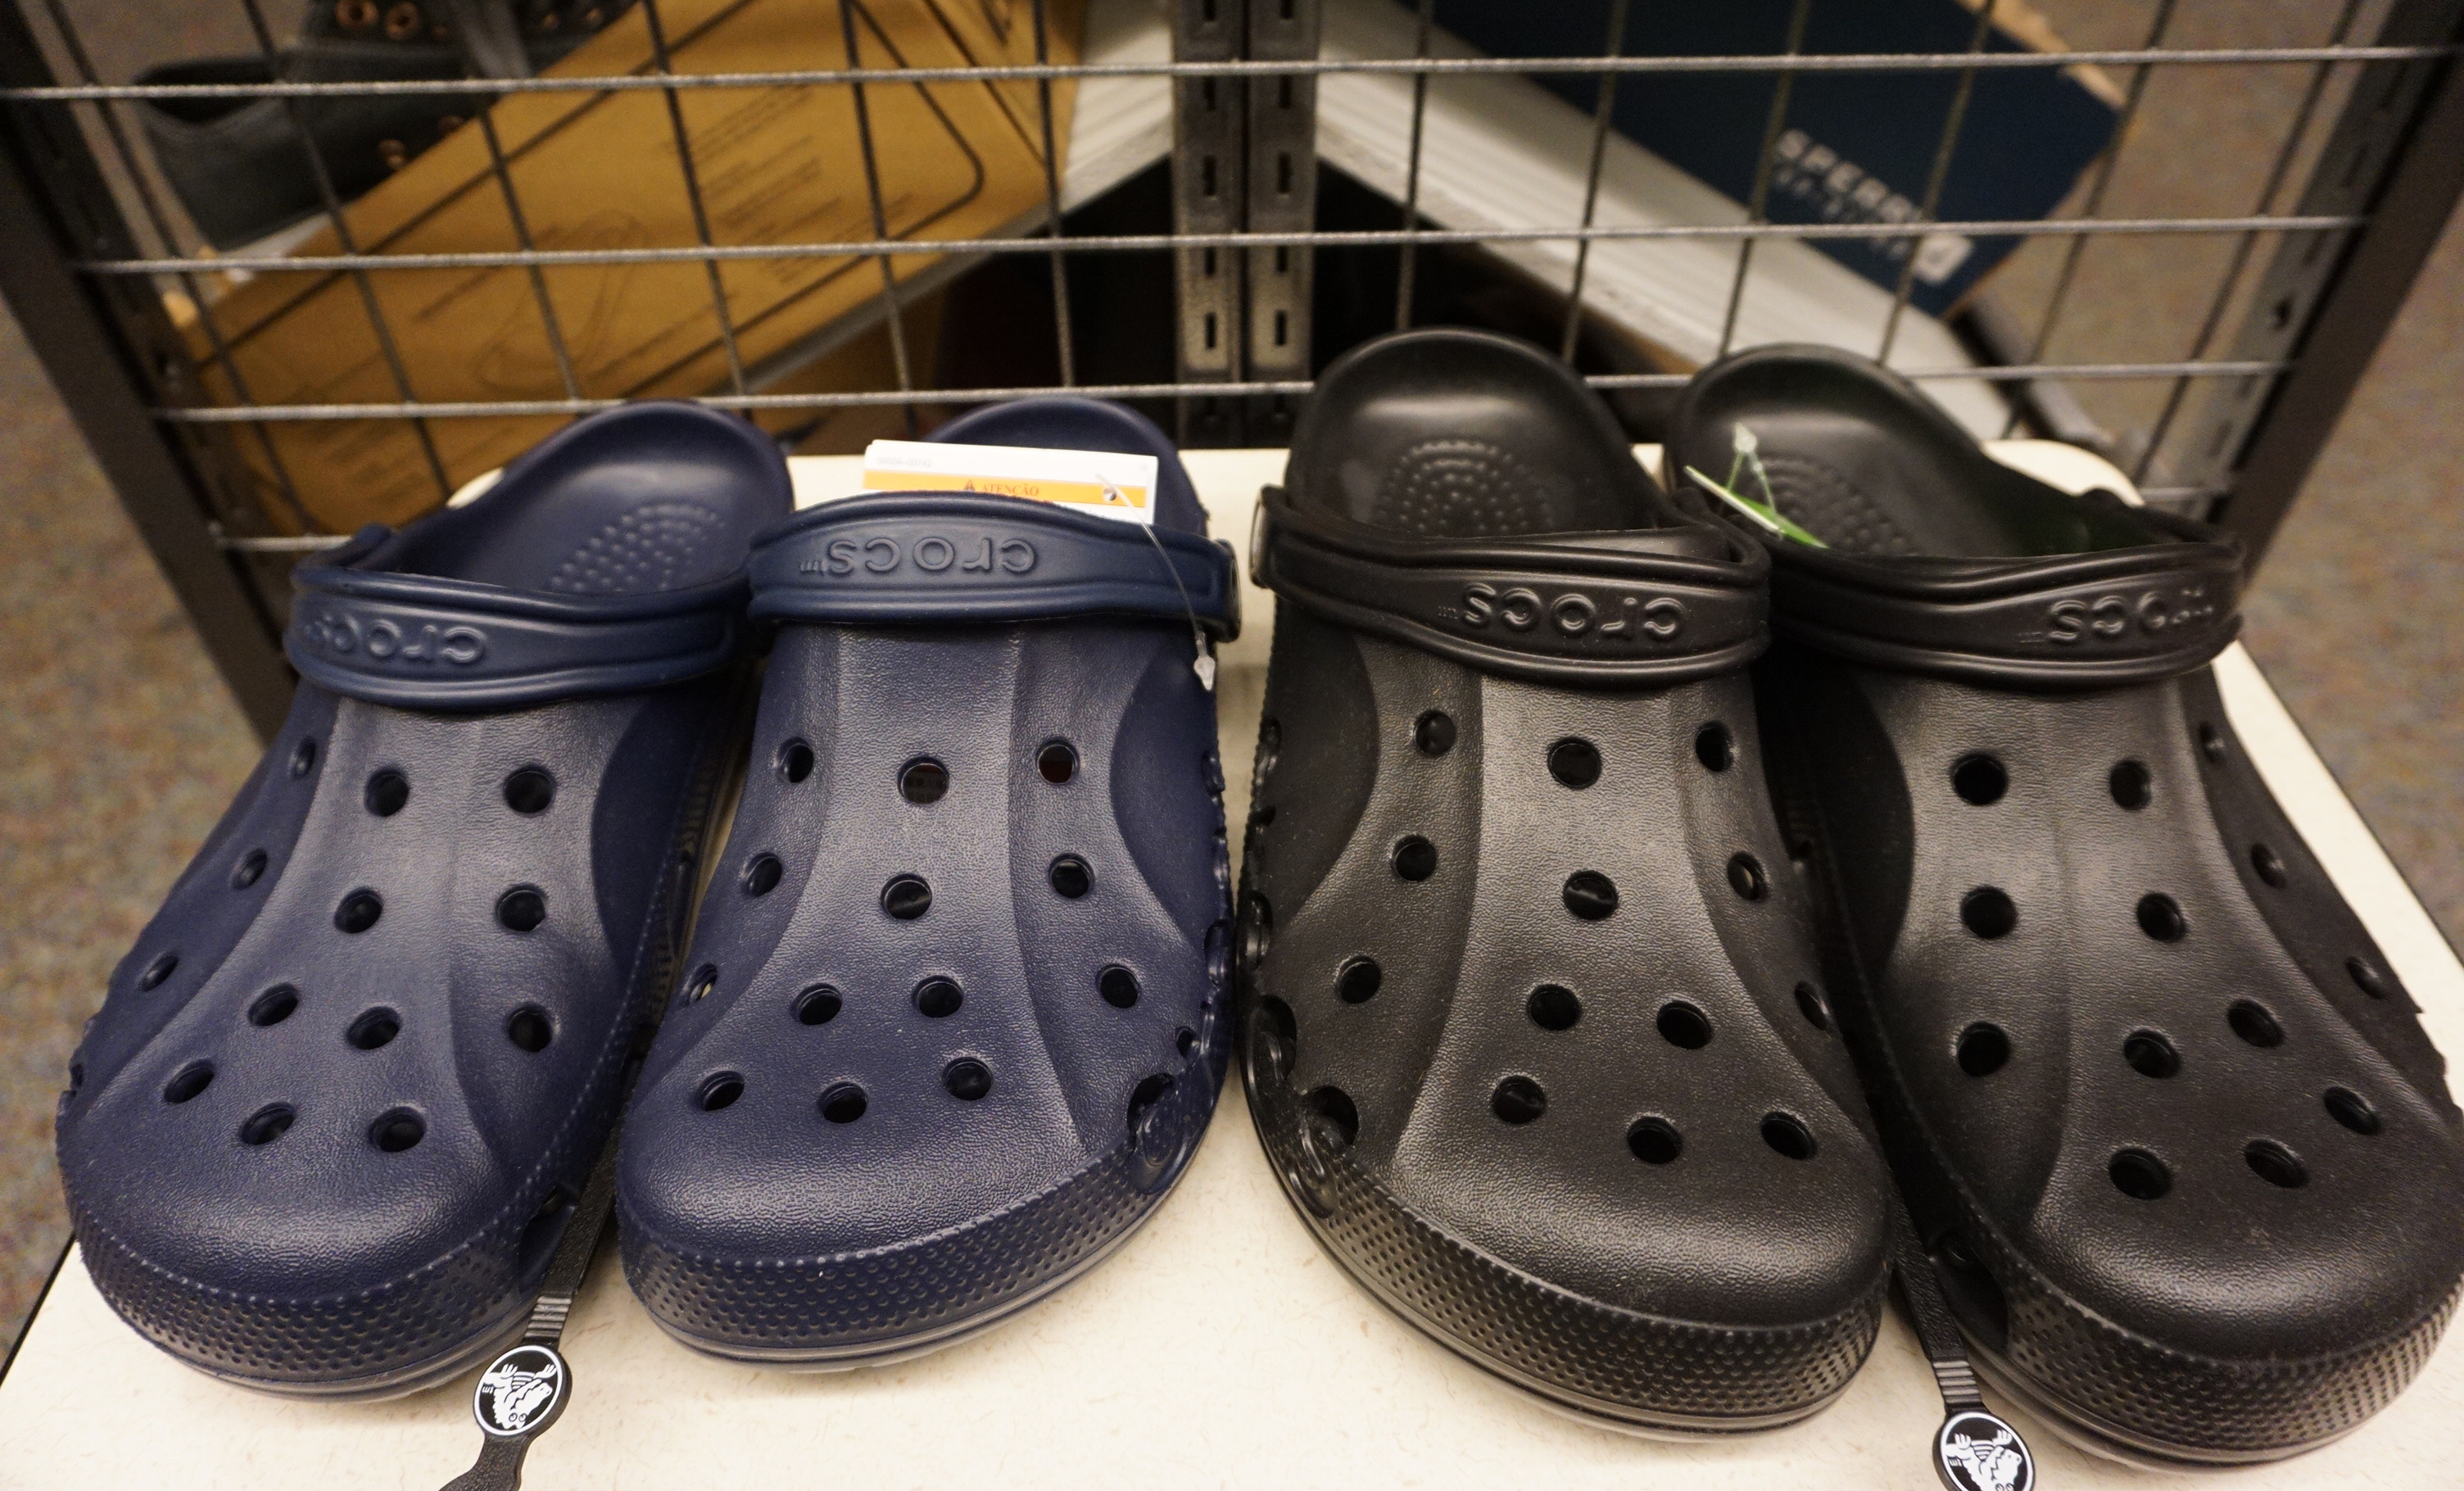 Crocs snaps at competition in court BusinessDen